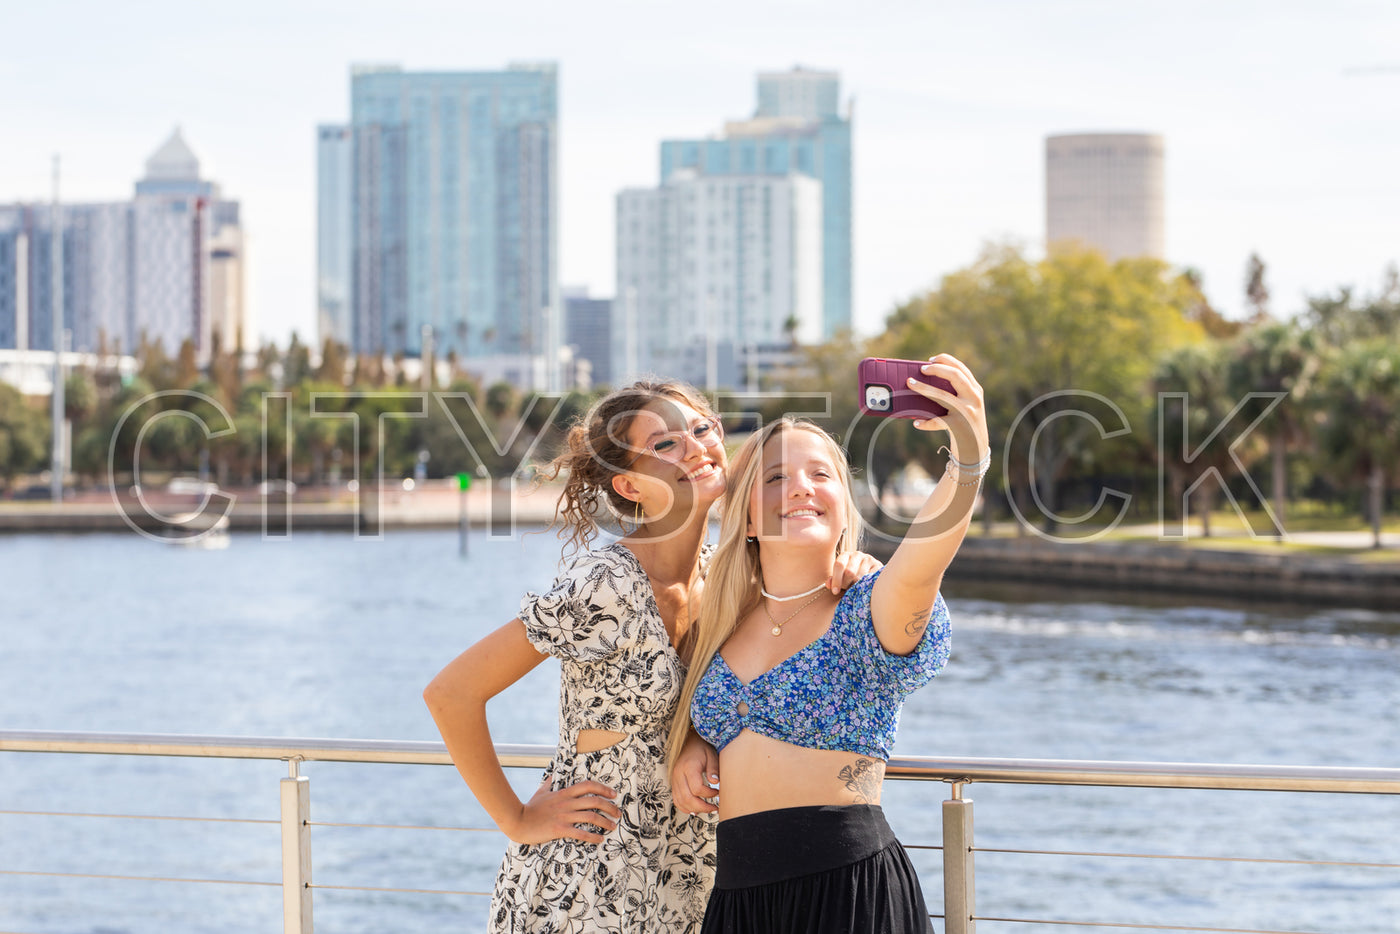 Joyful young women capturing selfie with Tampa skyline in the background